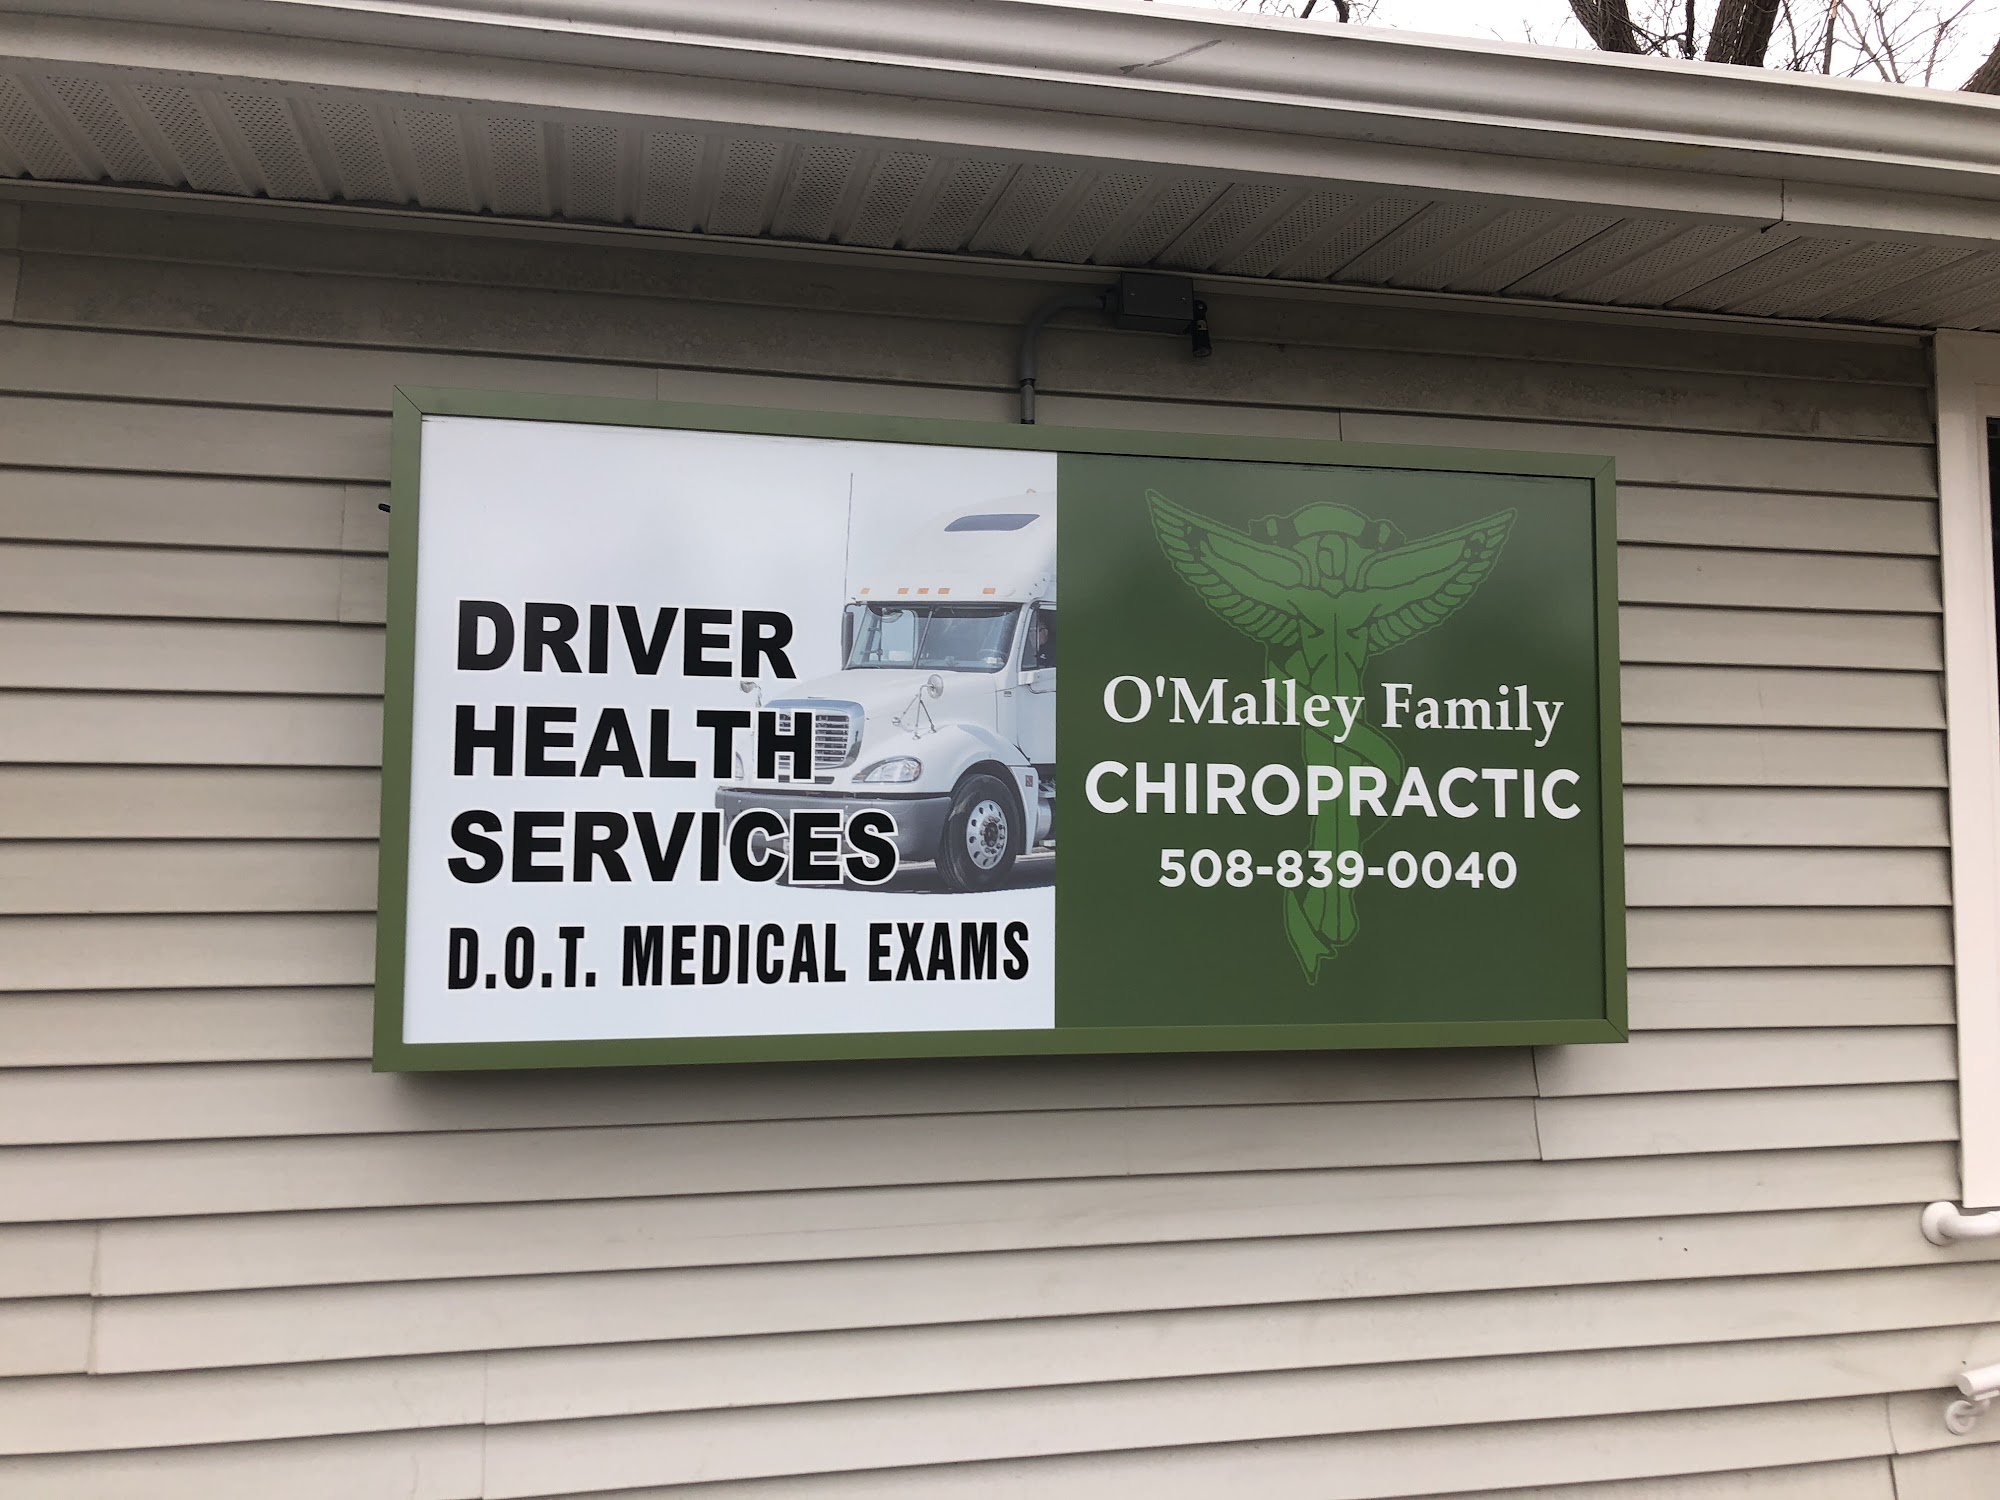 Driver Health Services - DOT Physicals 126 Worcester St, North Grafton Massachusetts 01536